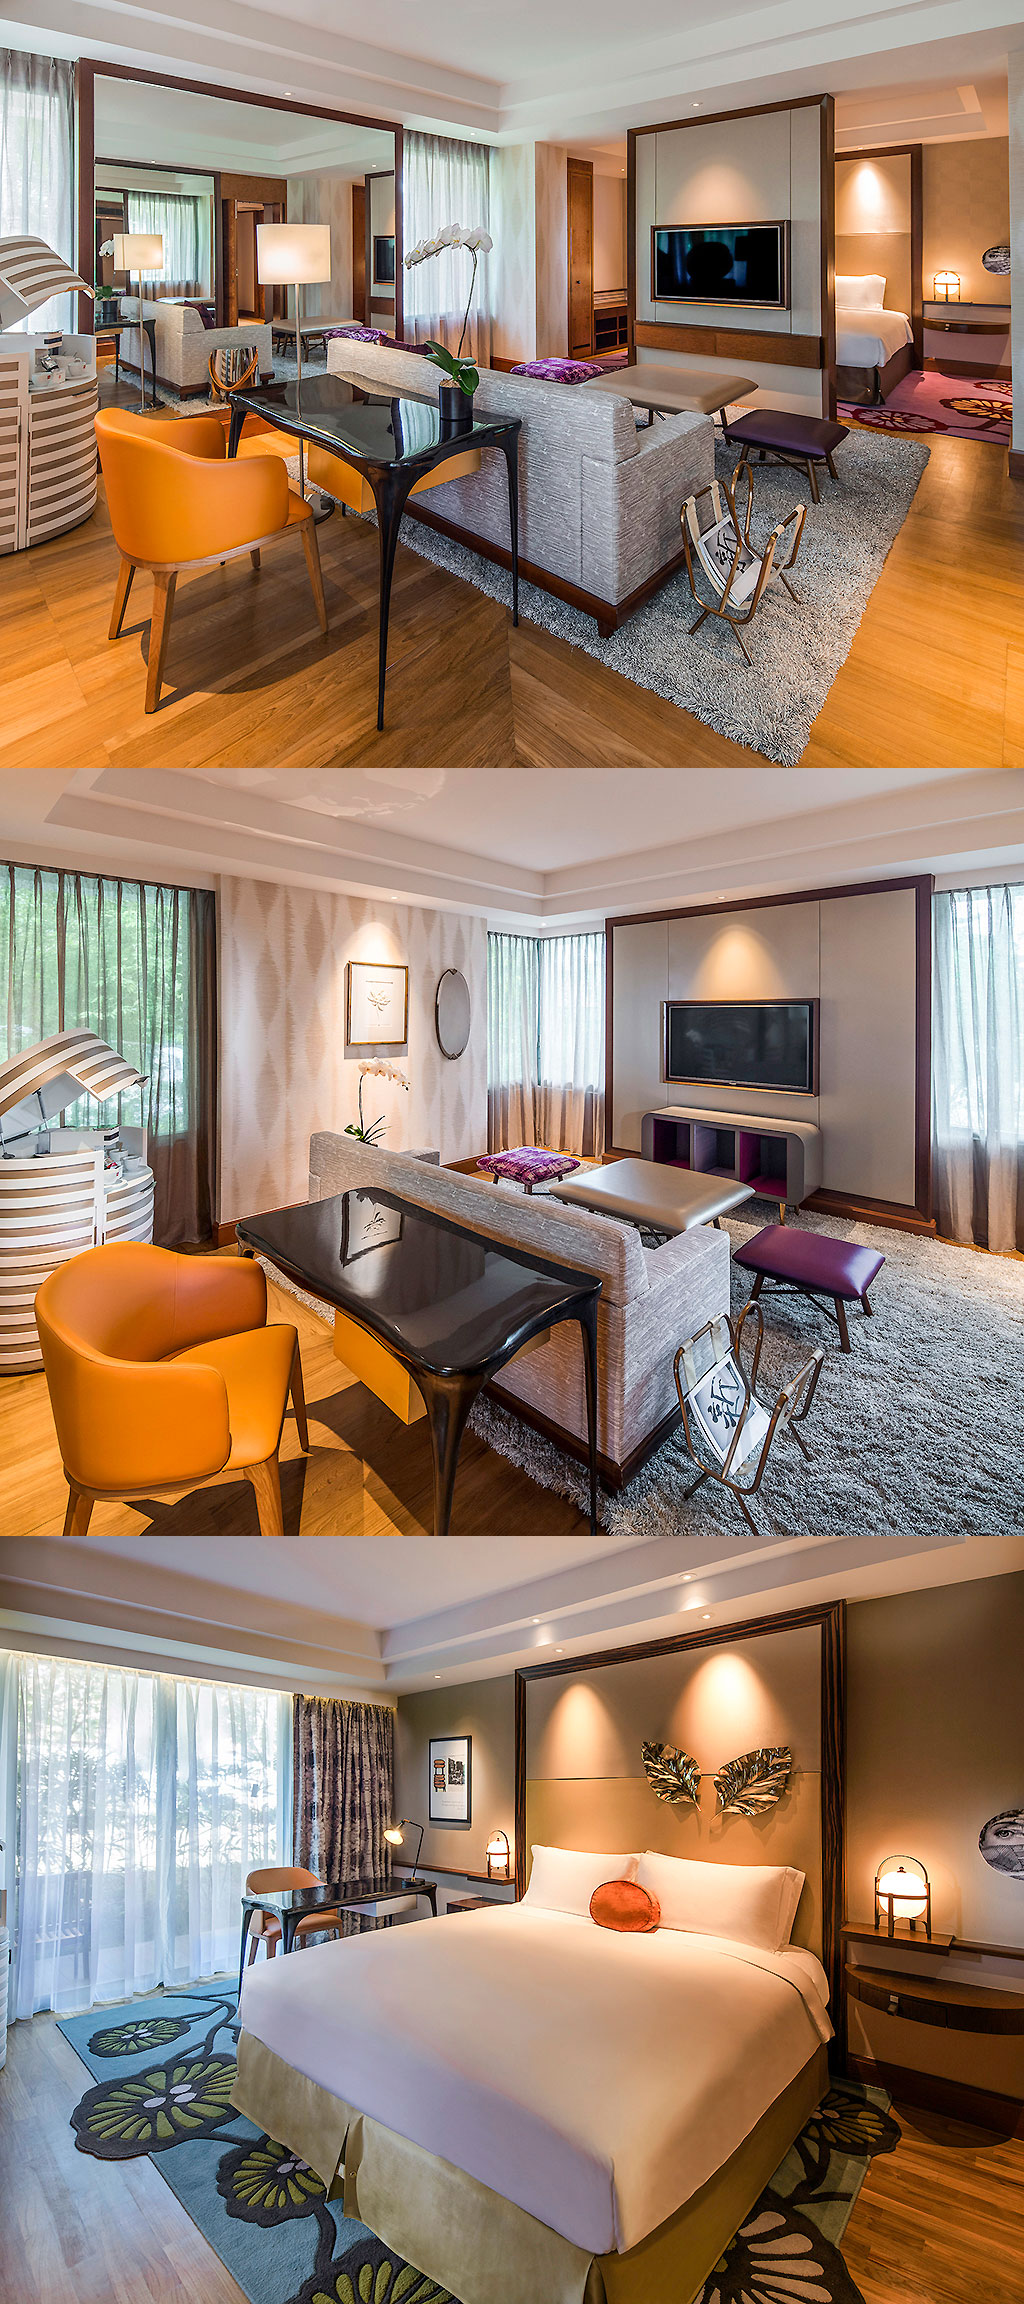 SKETCH desks installed at the Sentosa Resort and Spa, Singapore